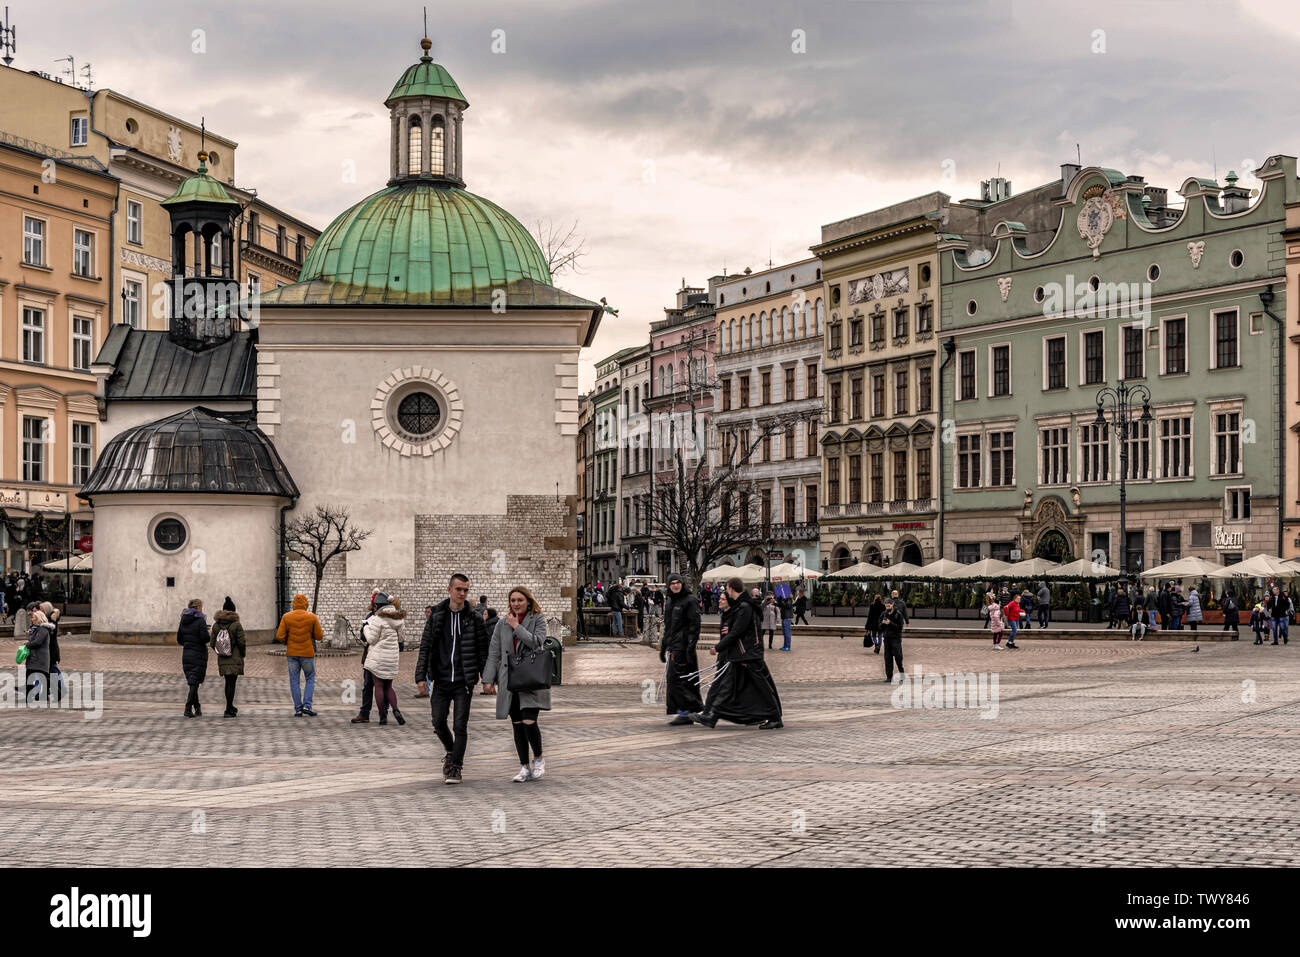 Cracow, Poland – Feb 2, 2019: Tourists at main square passing by The Church of St. Adalbert or of St. Wojciech, the 11th century church in Cracow, Pol Stock Photo